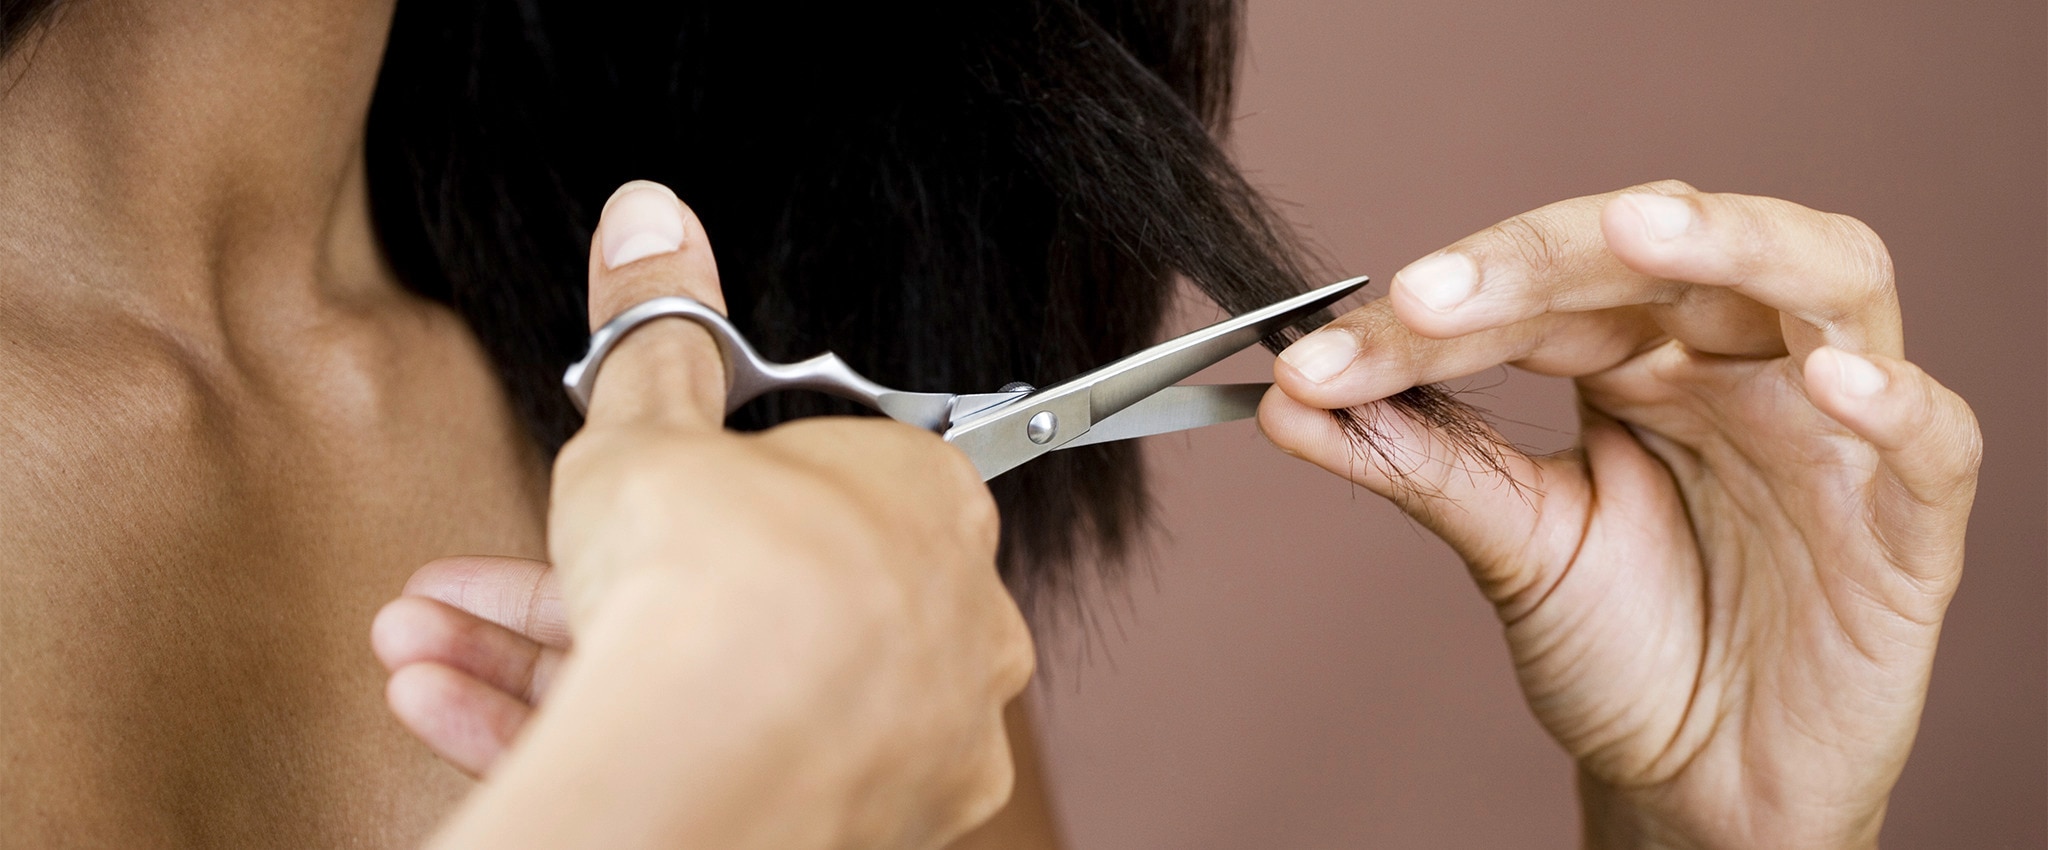 Woman cutting a small portion of her hair